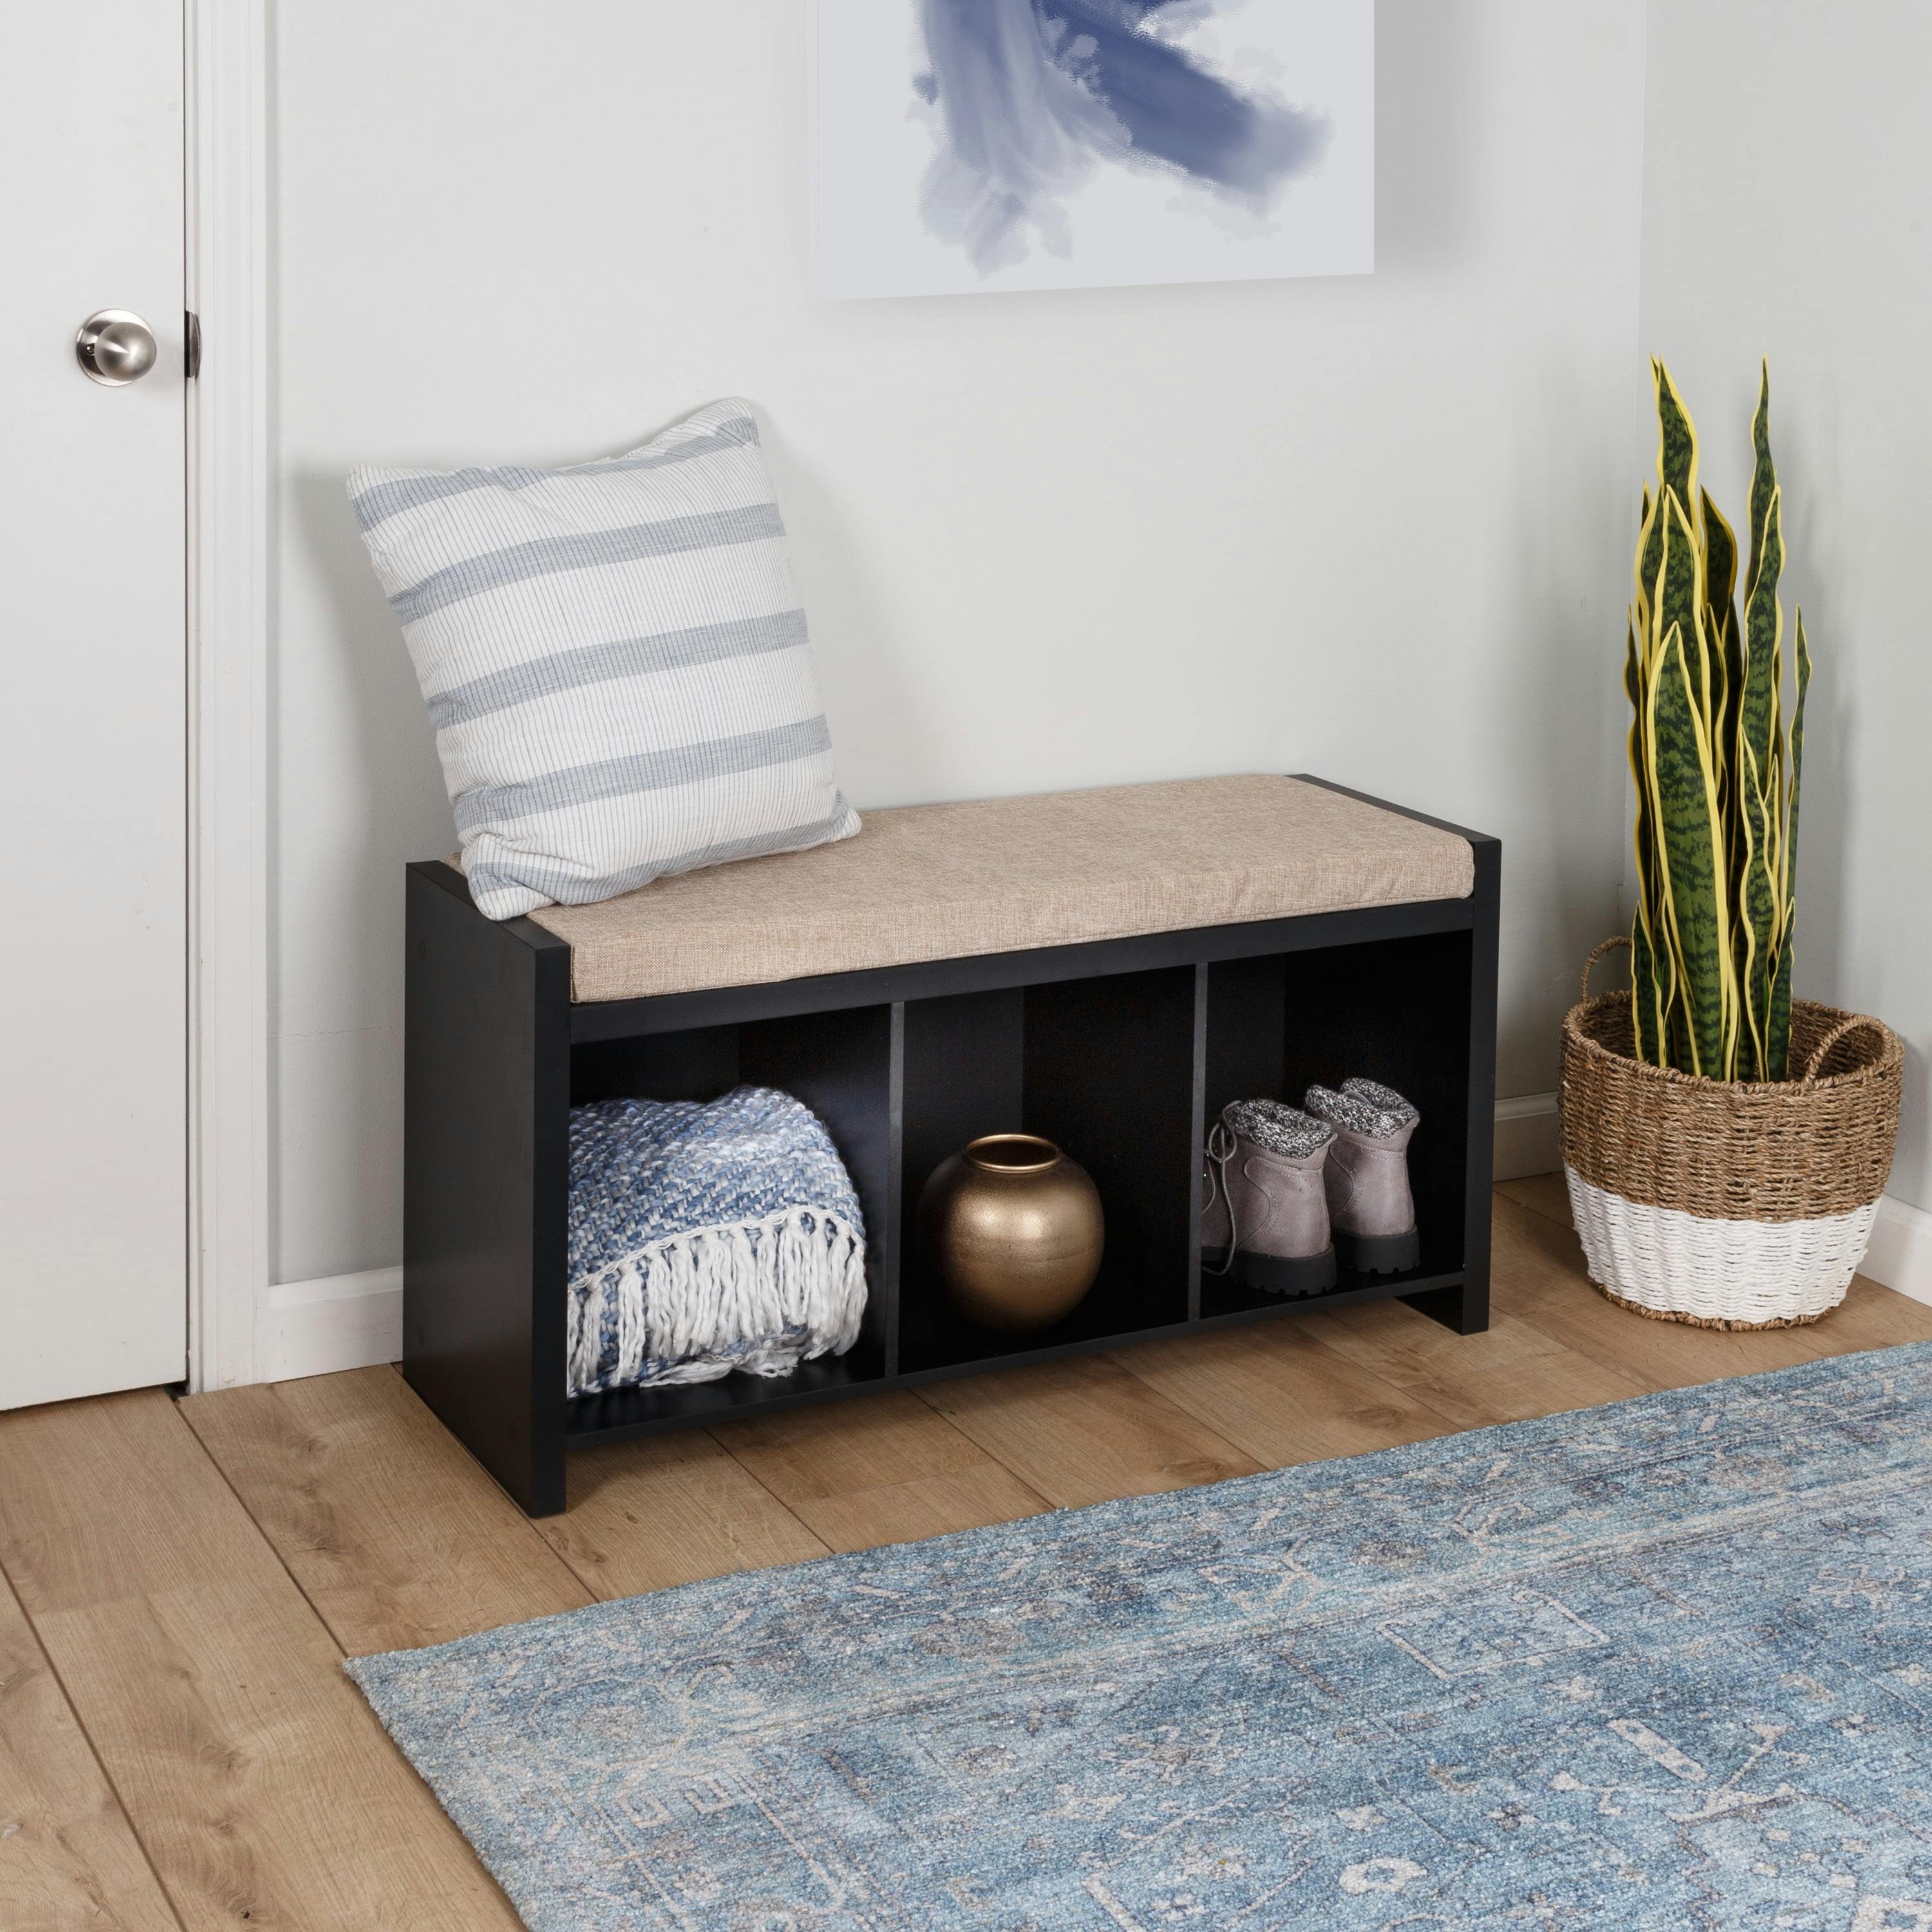 Modern Black Storage Bench with Tan Cushion and Cubby Shelves